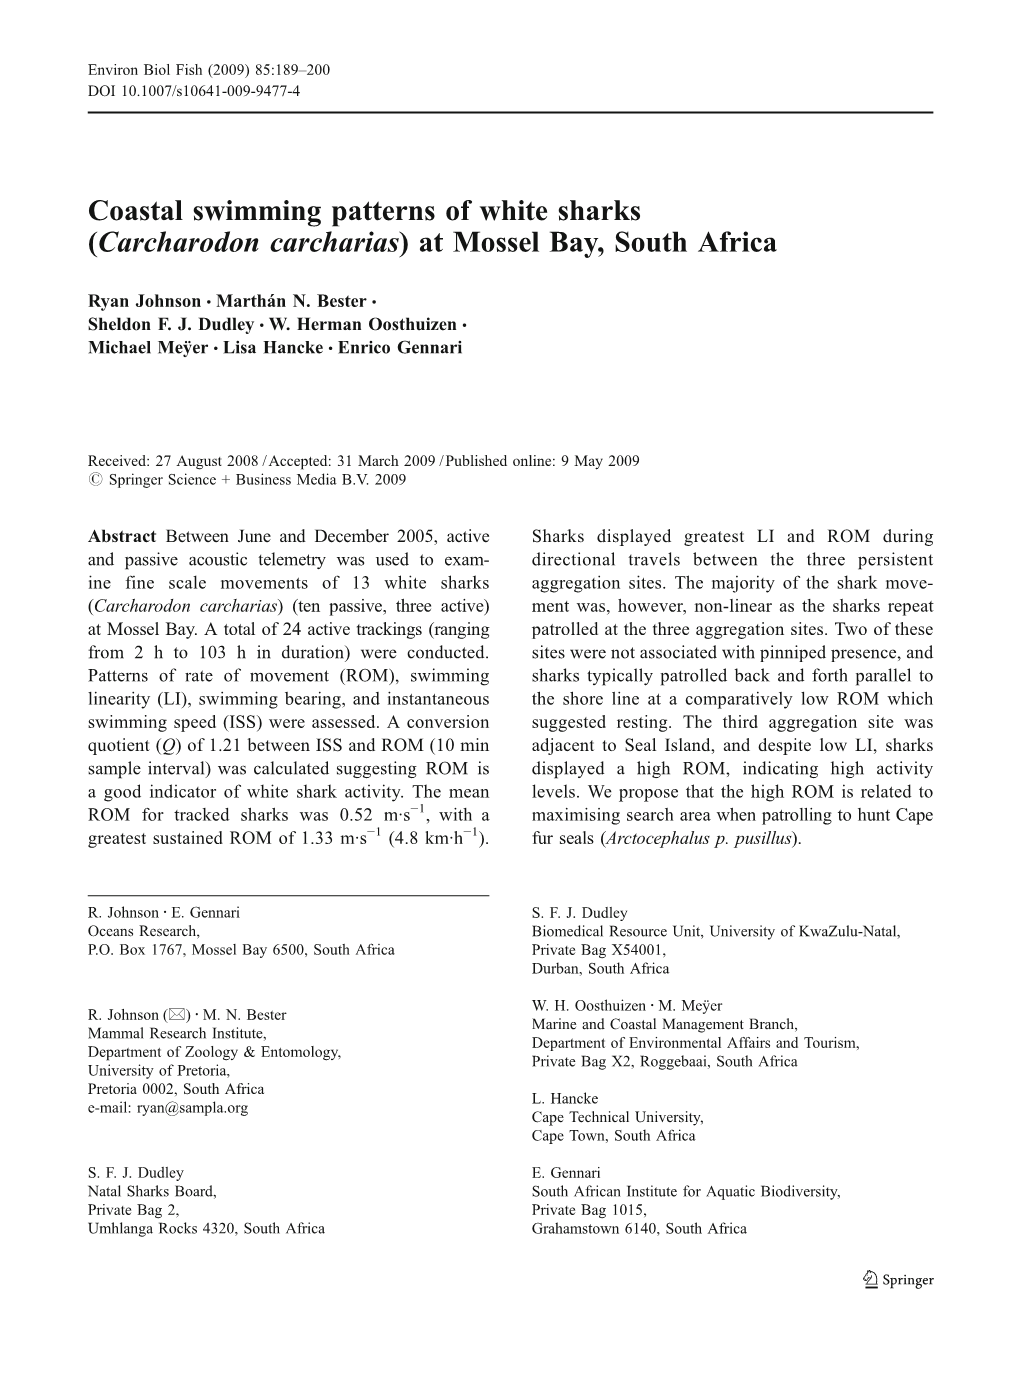 Coastal Swimming Patterns of White Sharks (Carcharodon Carcharias) at Mossel Bay, South Africa